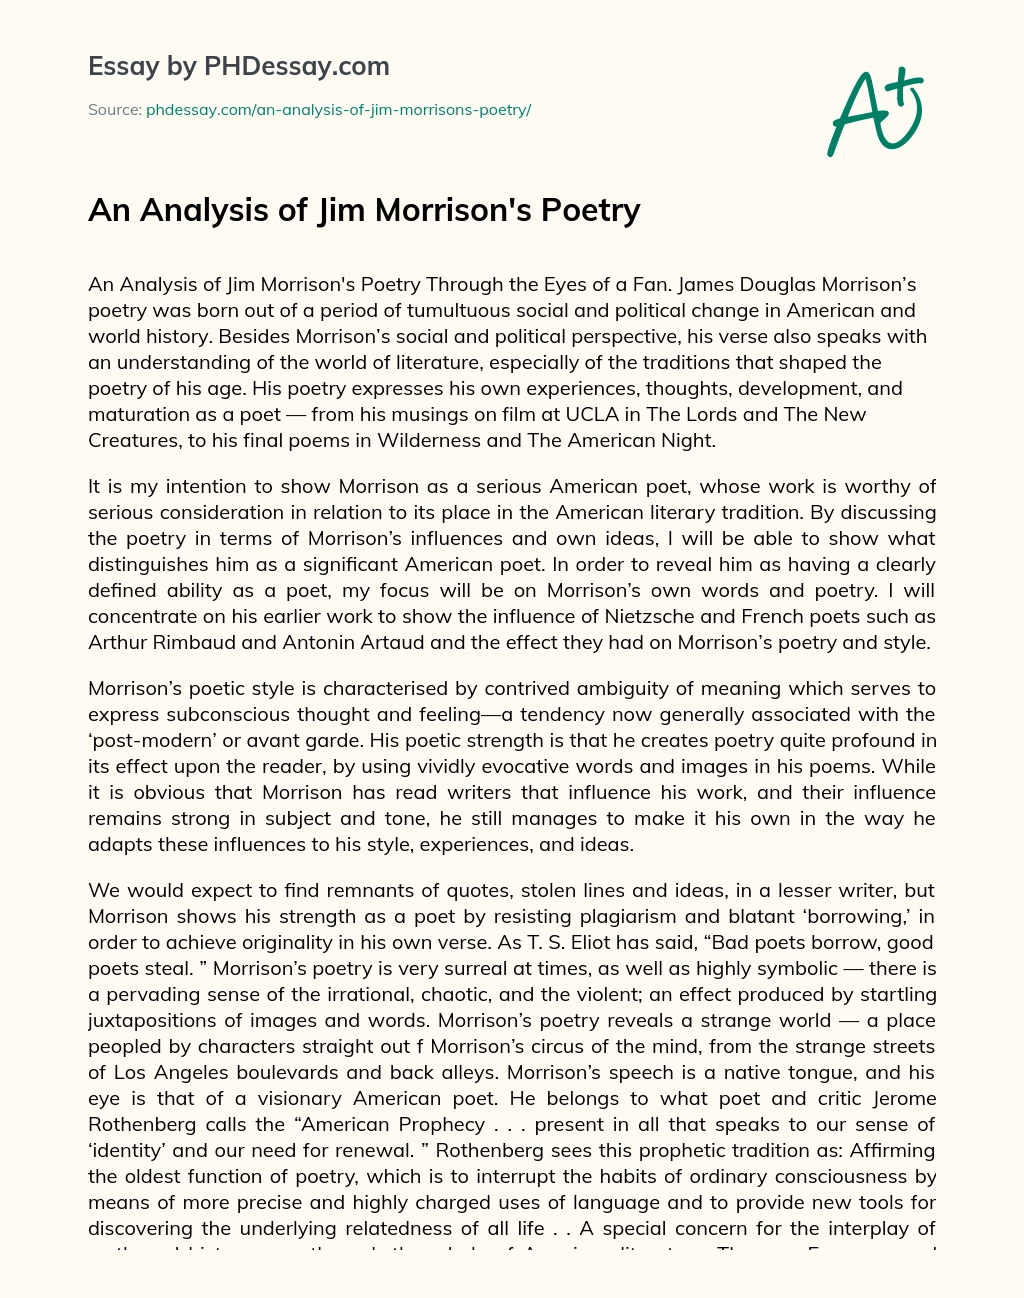 An Analysis of Jim Morrison’s Poetry essay